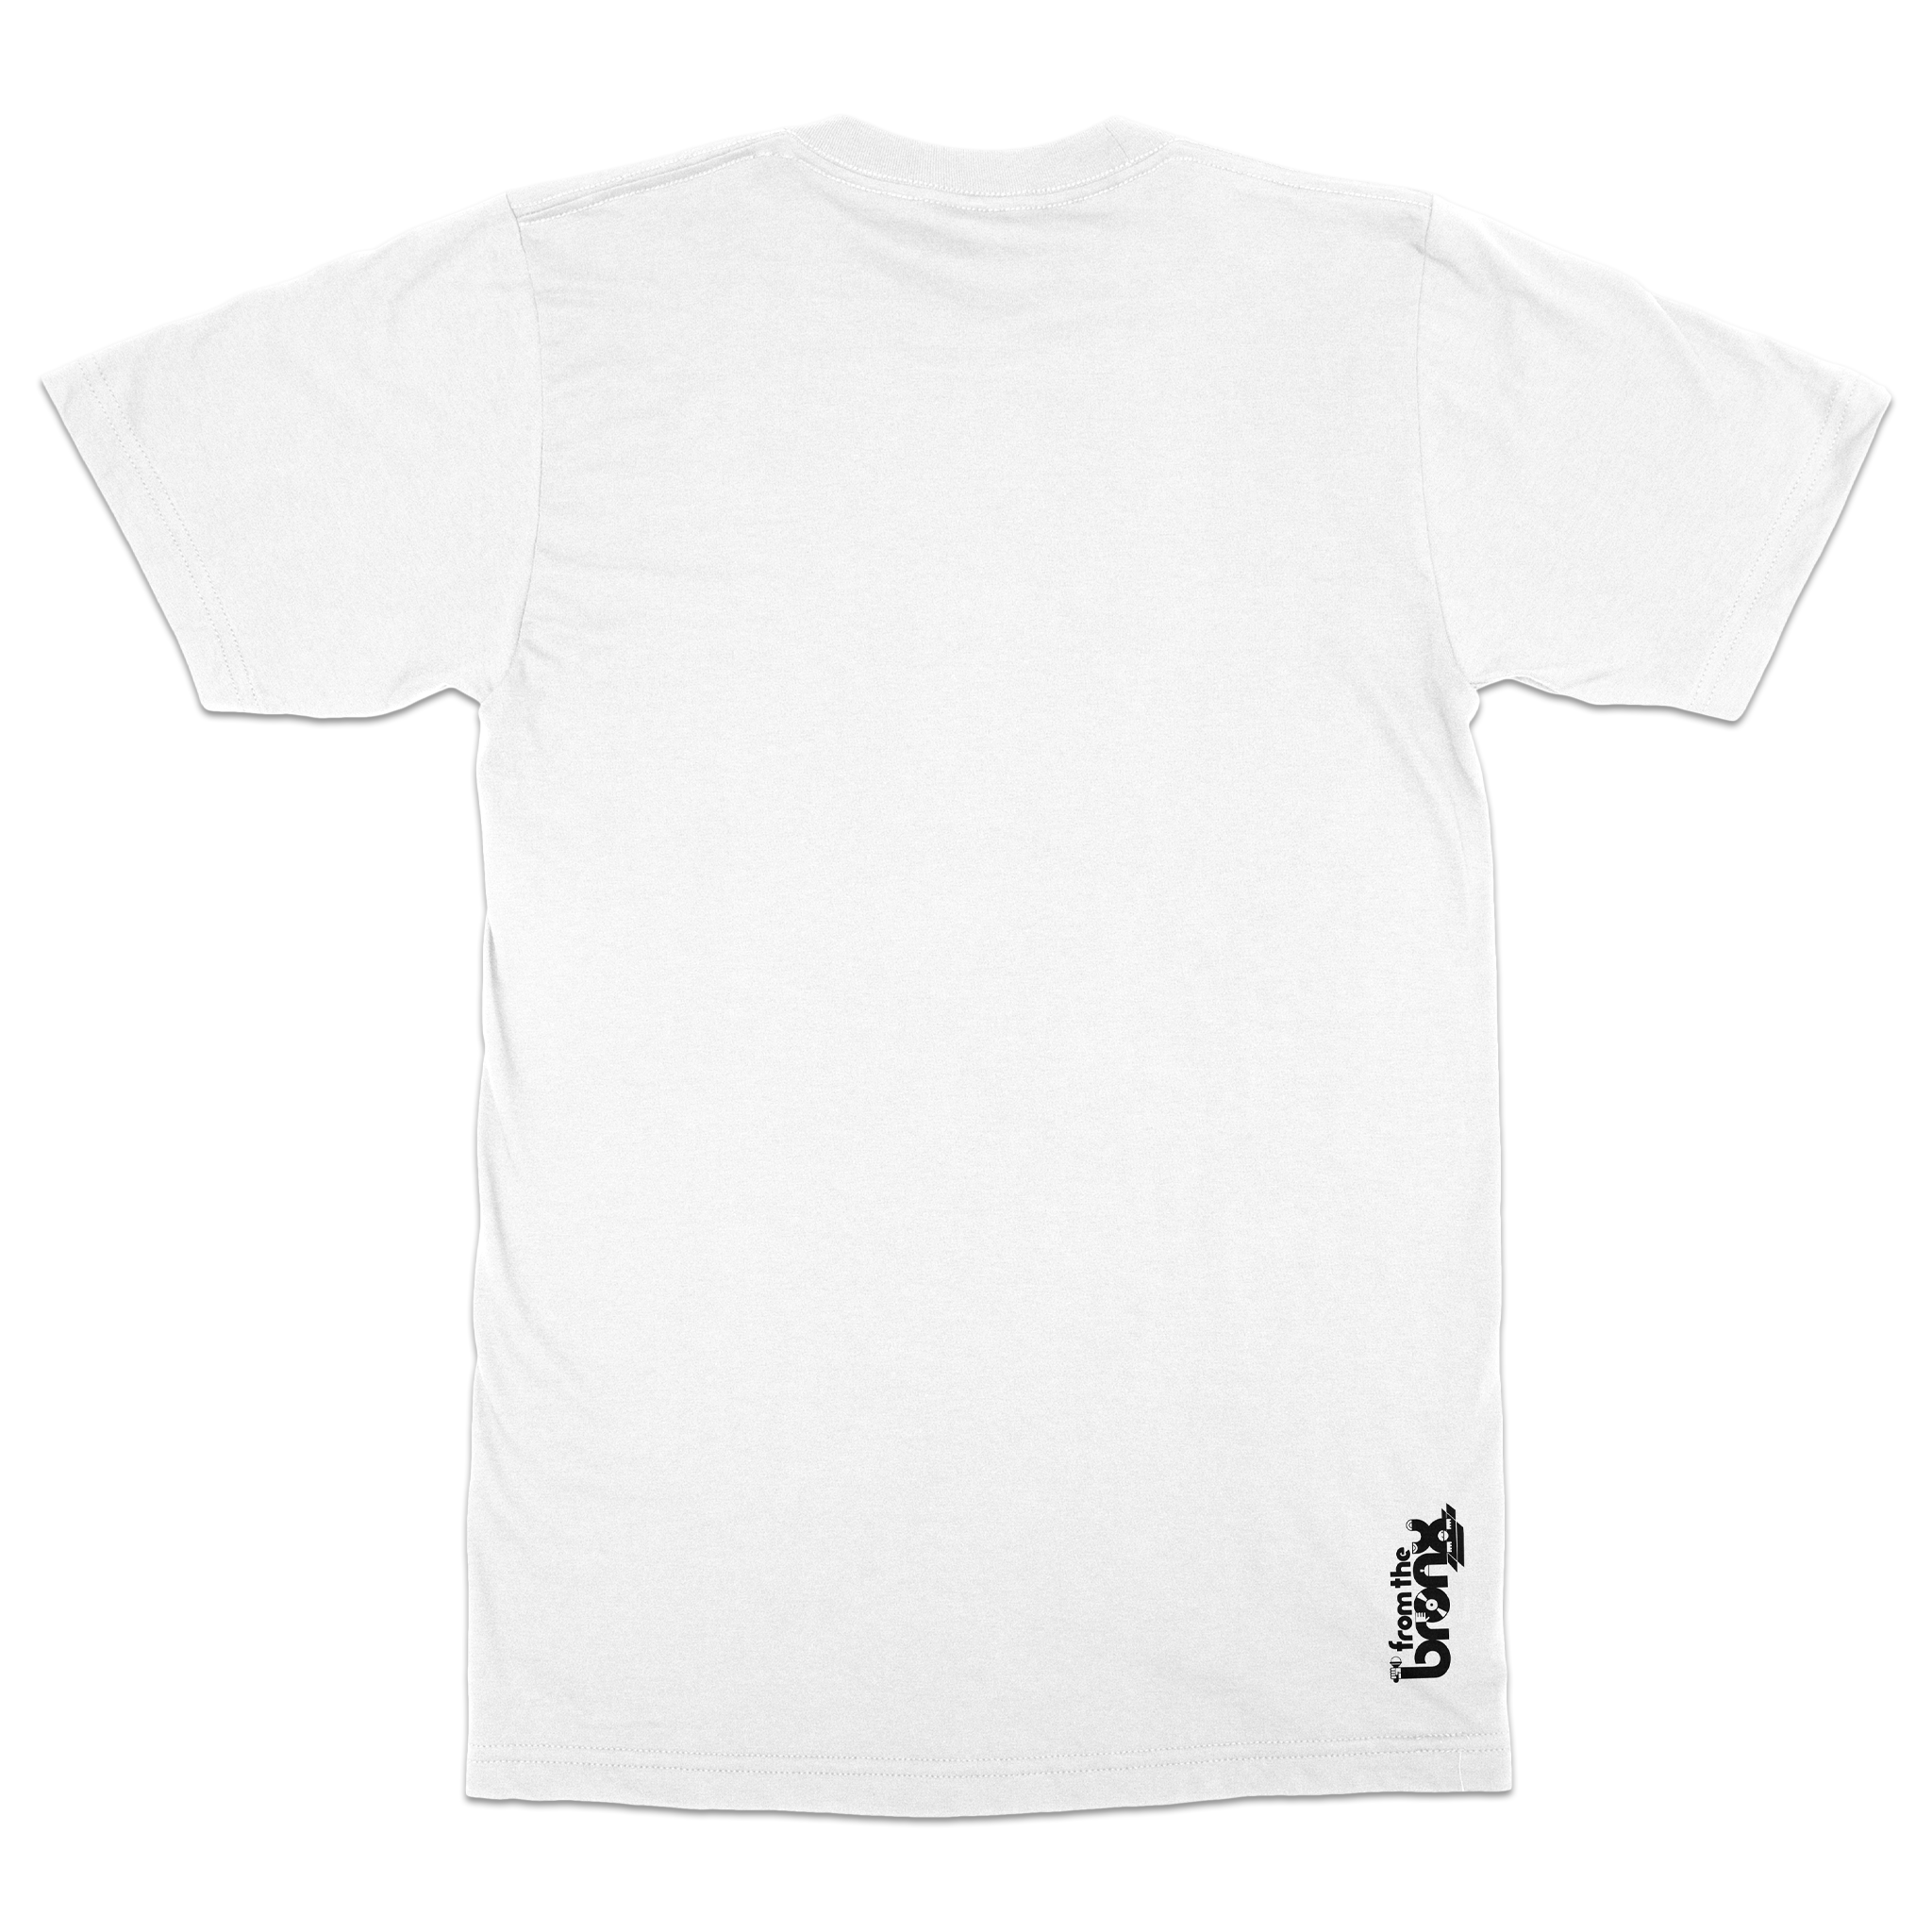 From The Bronx Full-Color Logo T-Shirt Back in White